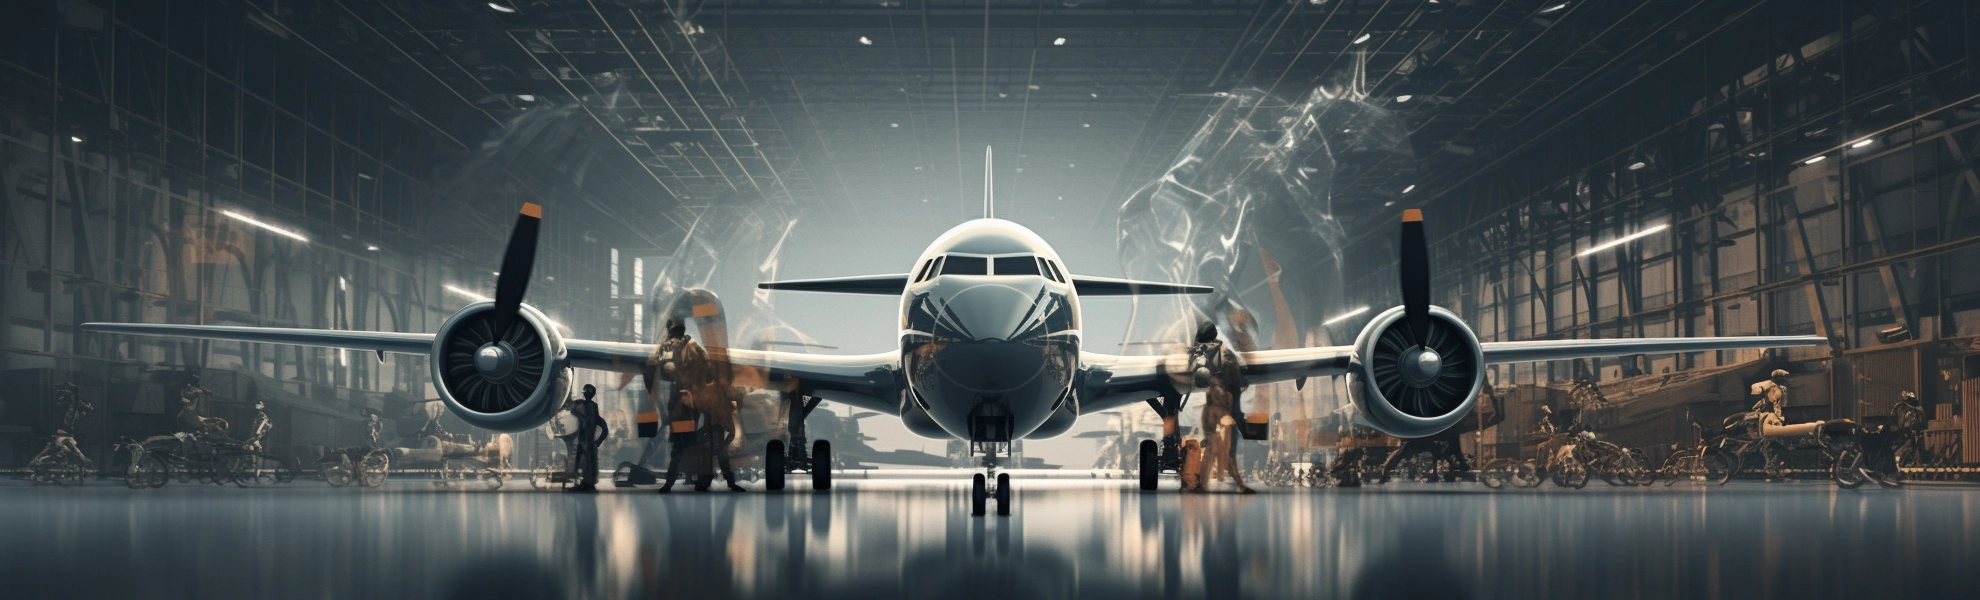 The Future of Airlines: How AI and Automation Are Revolutionizing the Aviation Industry